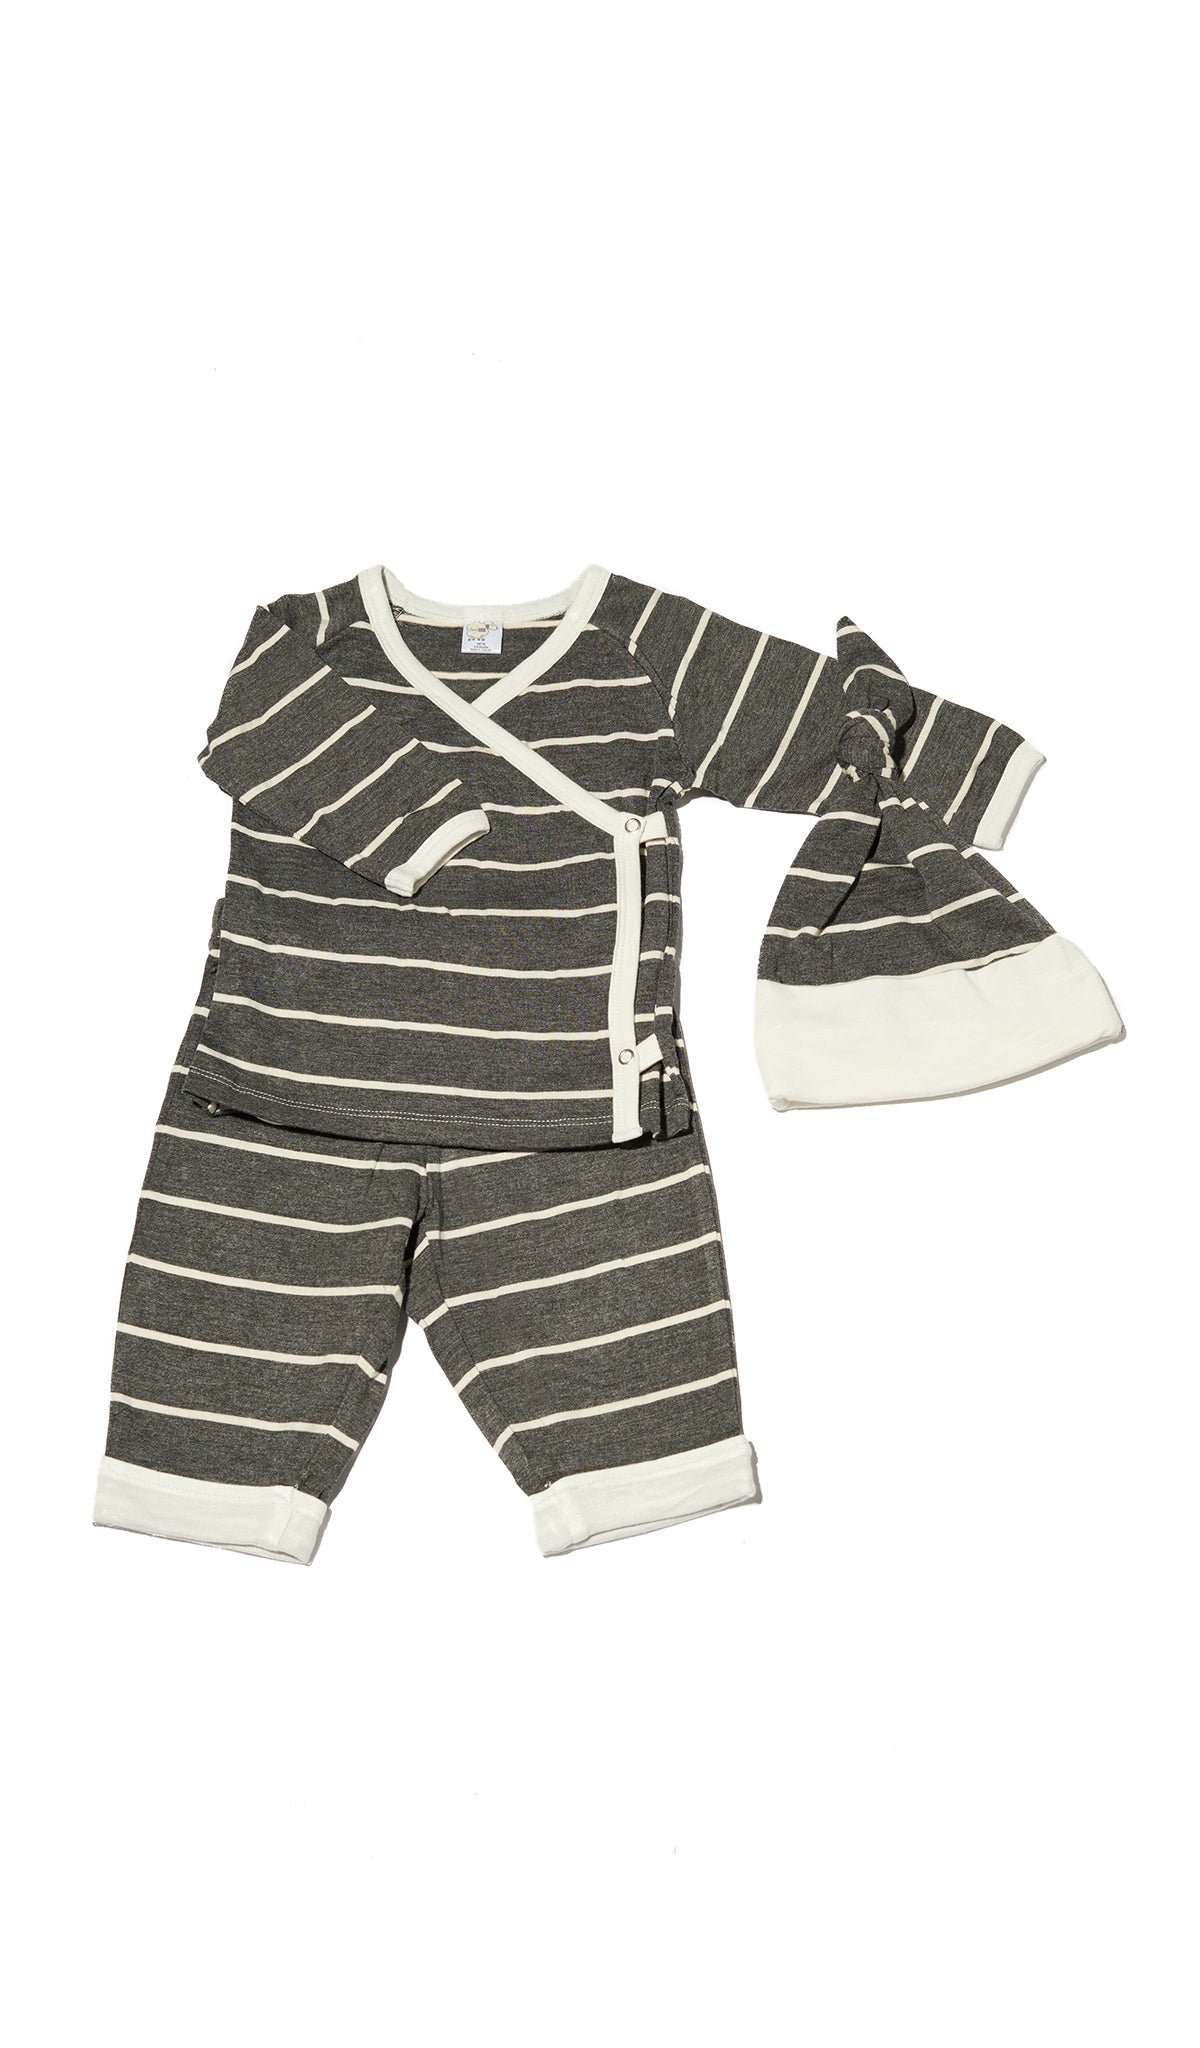 Charcoal Baby's Take-Me-Home 3 Piece set flat shot showing long sleeve kimono top and cuffed pant with matching knotted baby hat.